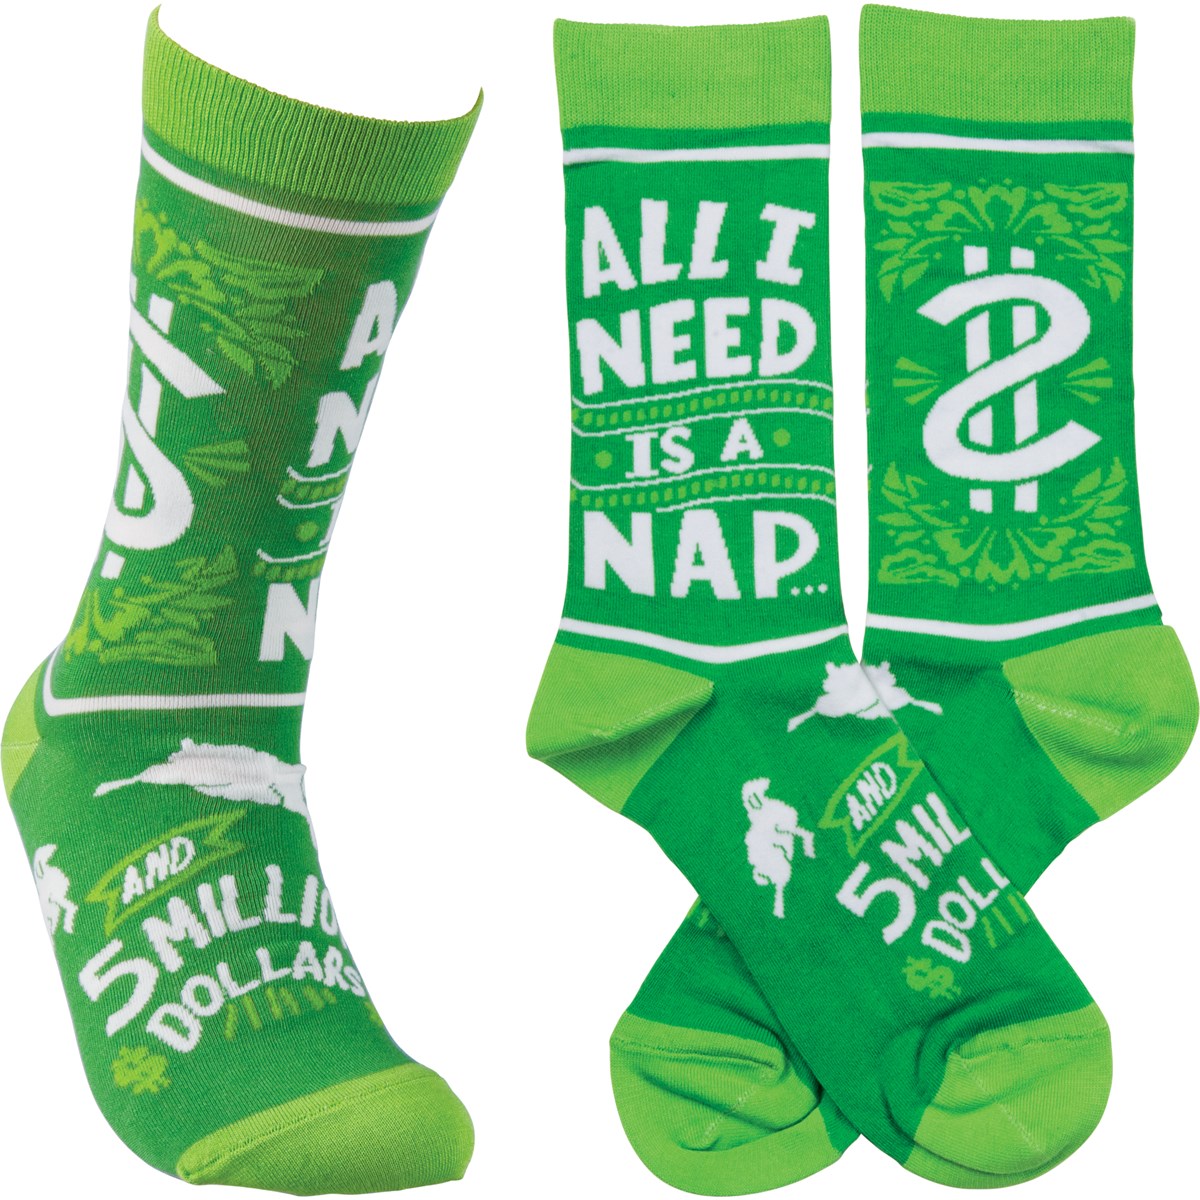 Socks - All I Need Is A Nap And 5 Million Dollars